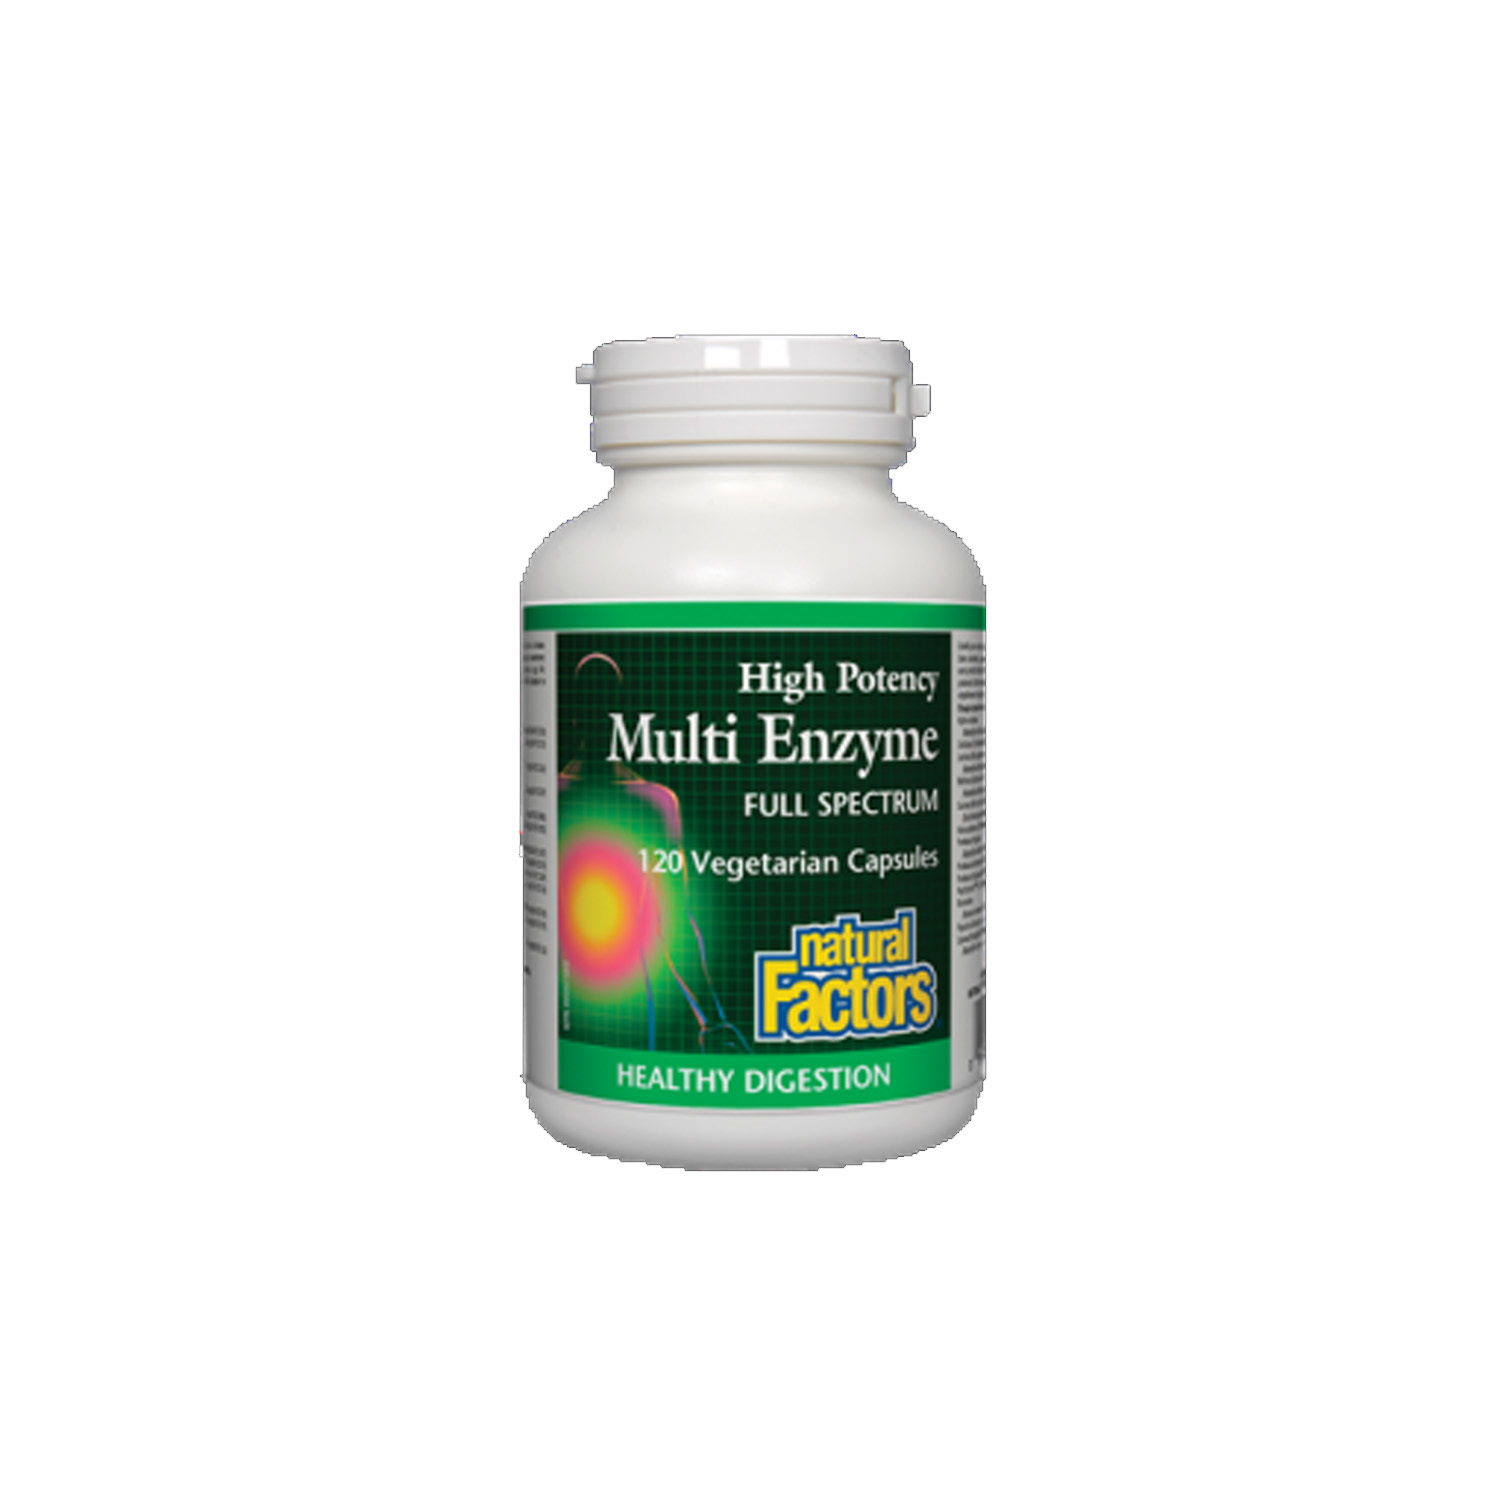 Primary image for Natural Factors High Potency Multi Enzyme, 120 Vegetarian Capsules